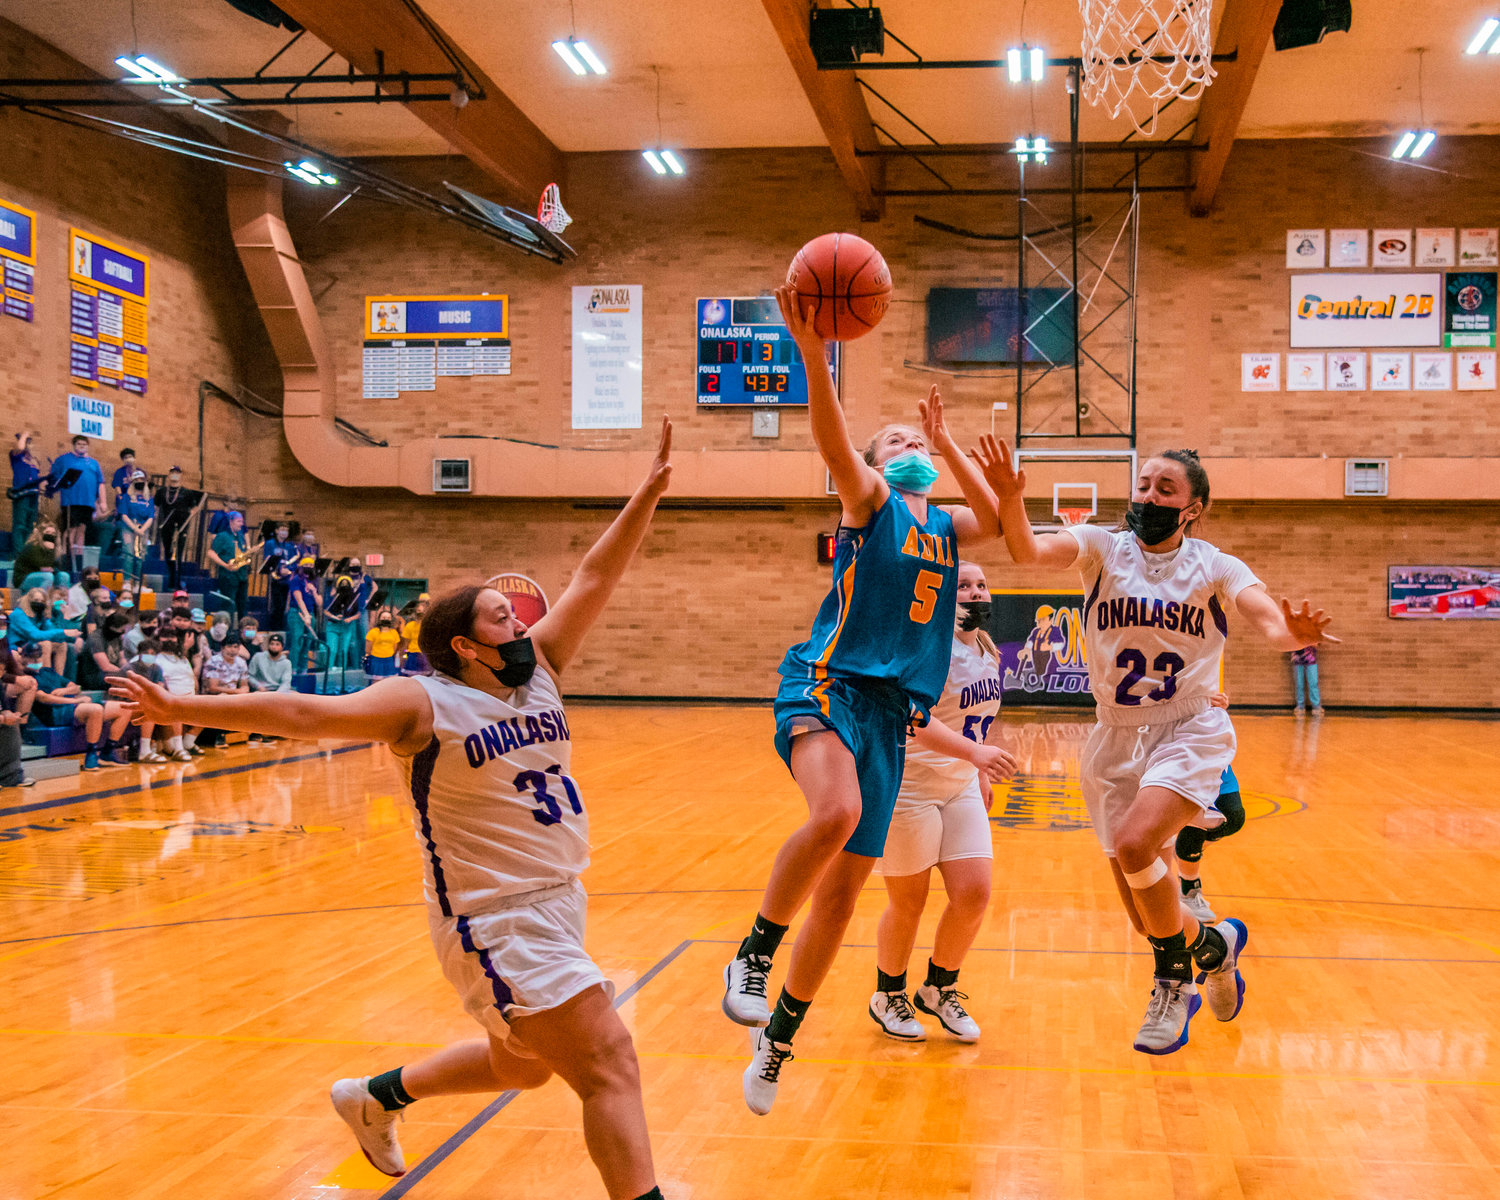 Adna’s Kaylin Todd (5) goes up for a layup during a game against Onalaska on Thursday.